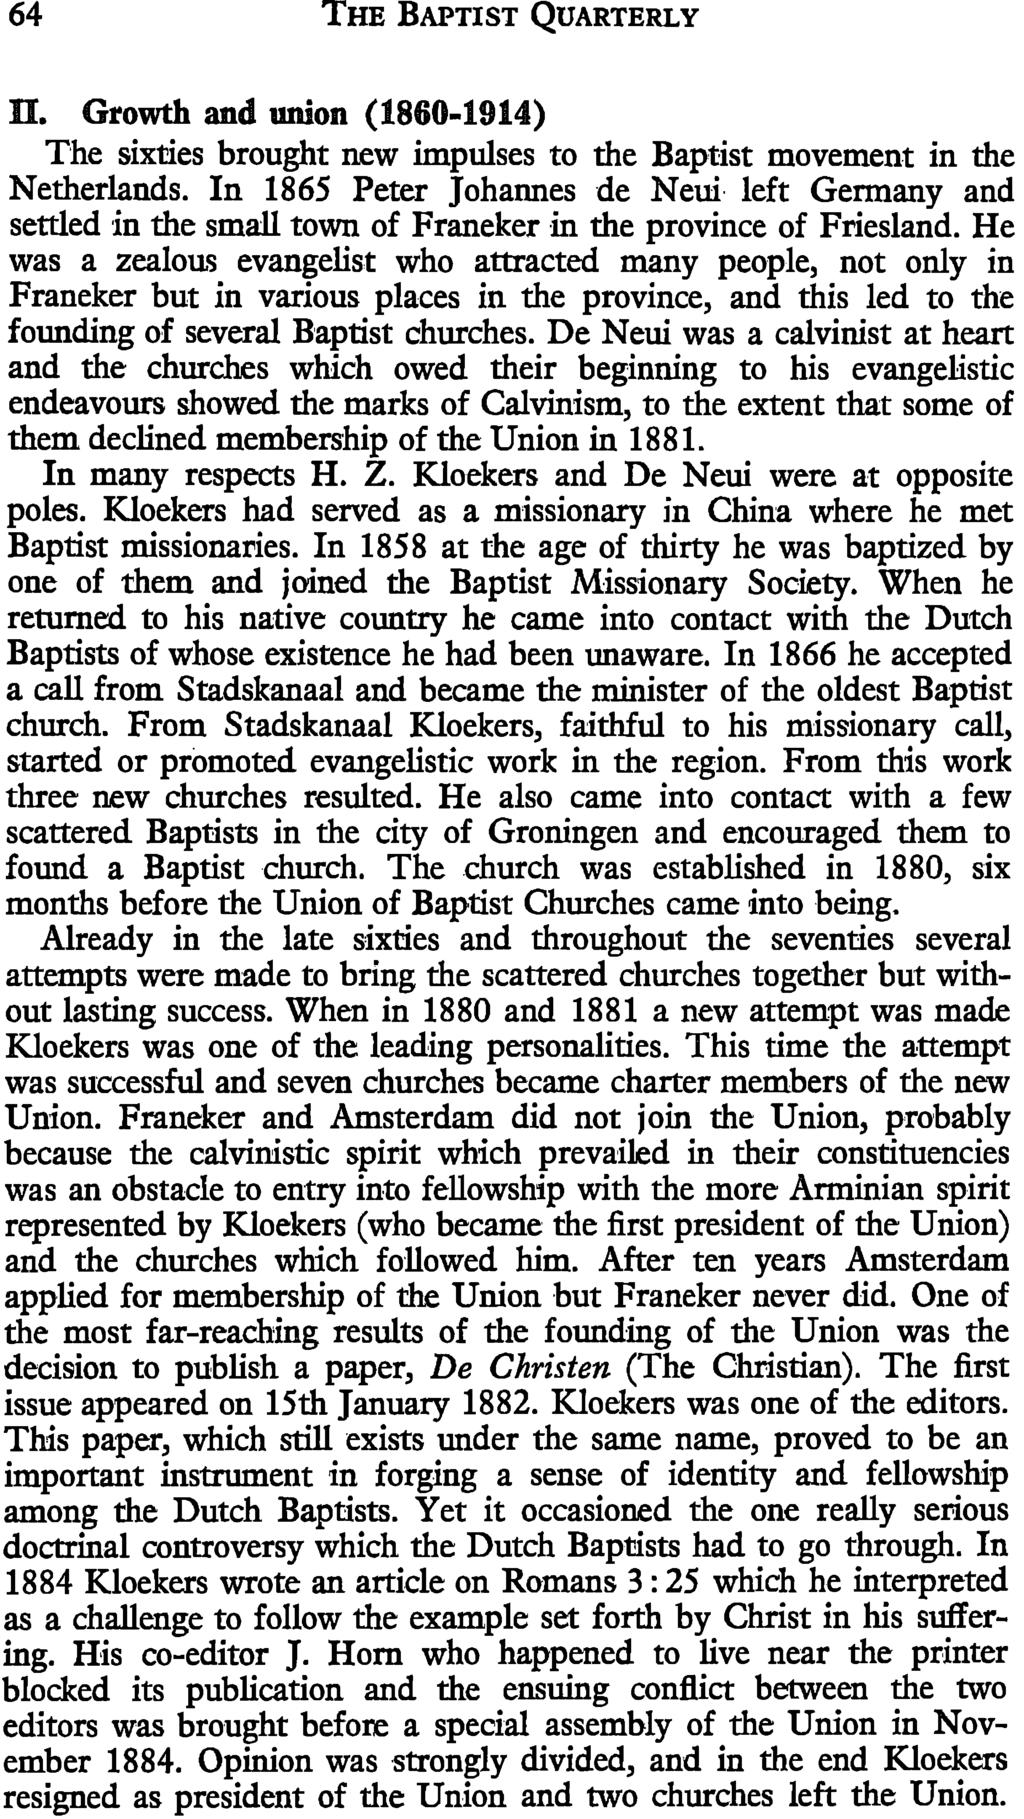 64 THE BAPTIST QUARTERLY n. Growth and union (1860-1914) The sixties brought new impulses to the Baptist movement in the Netherlands.